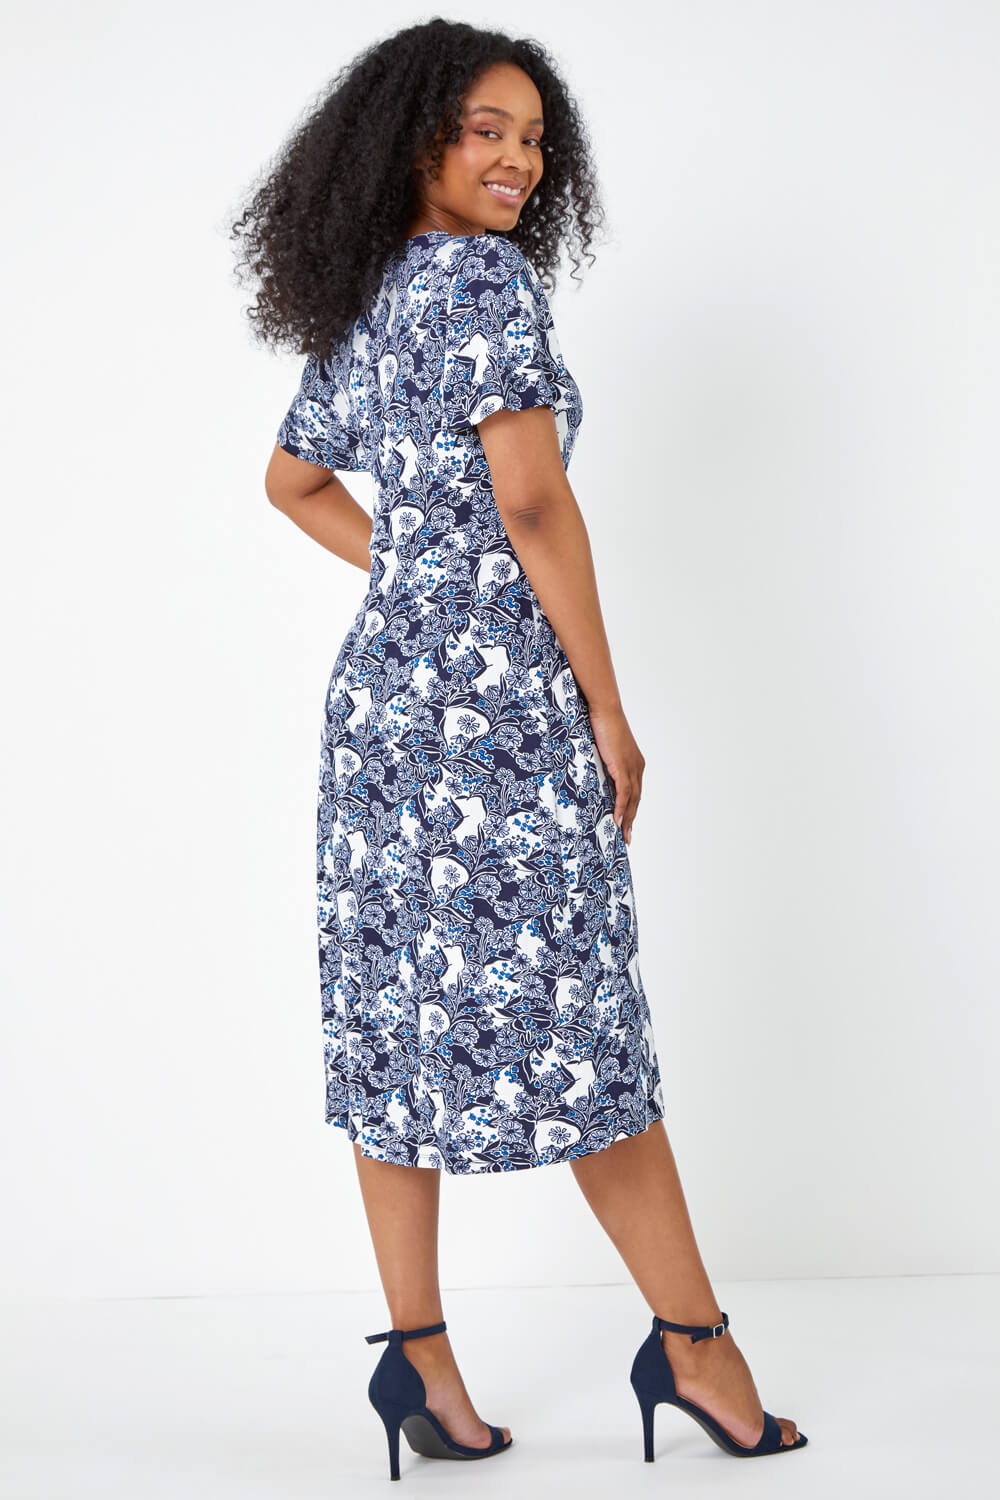 Blue Petite Floral Ruched Stretch Tea Dress, Image 3 of 5